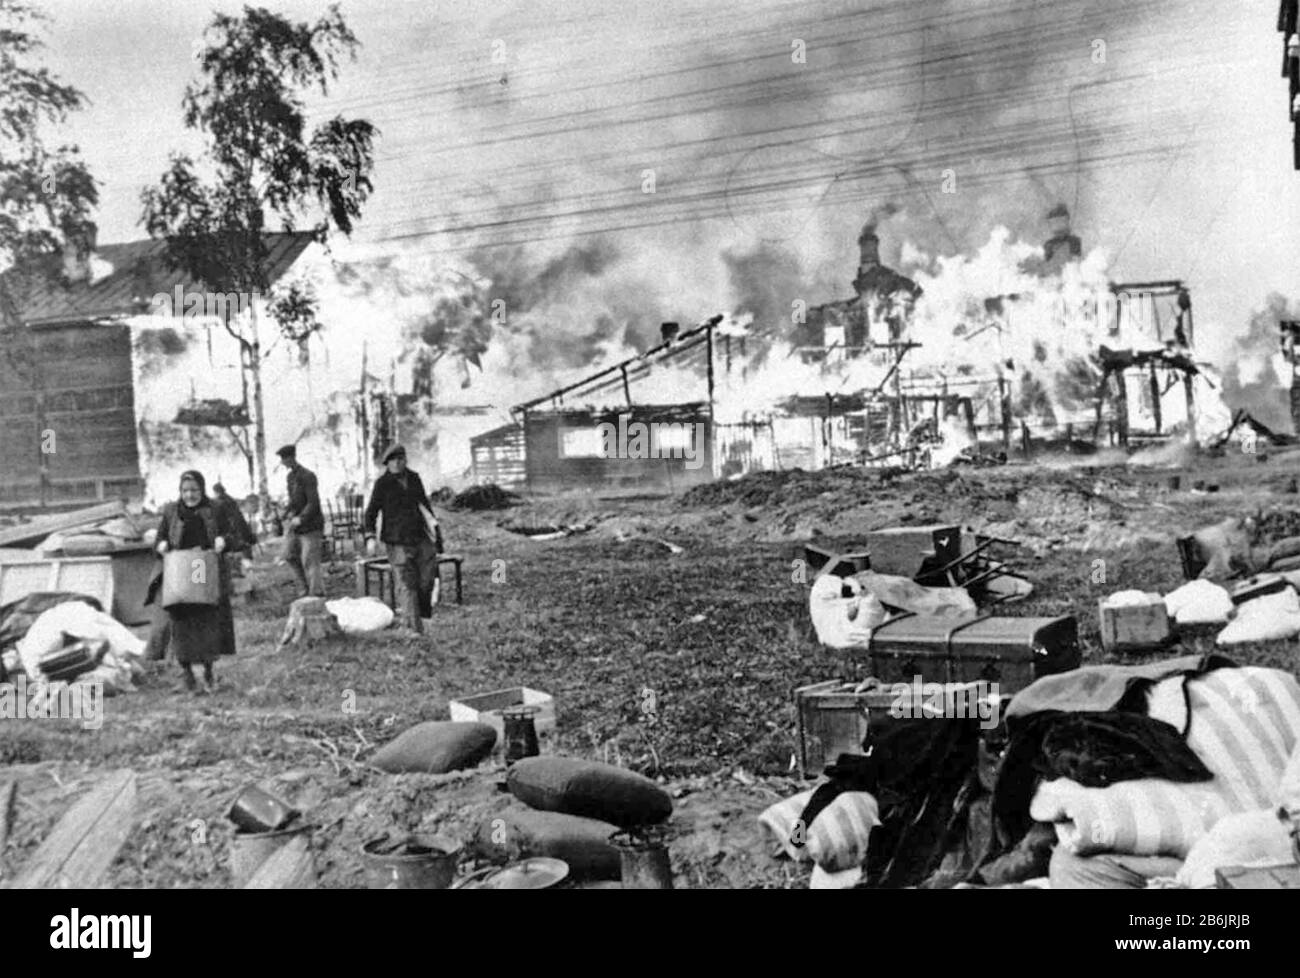 SCORCHED EARTH. Russians set fire to their village near Leningrad in 1941 to help foil a German advance. Stock Photo